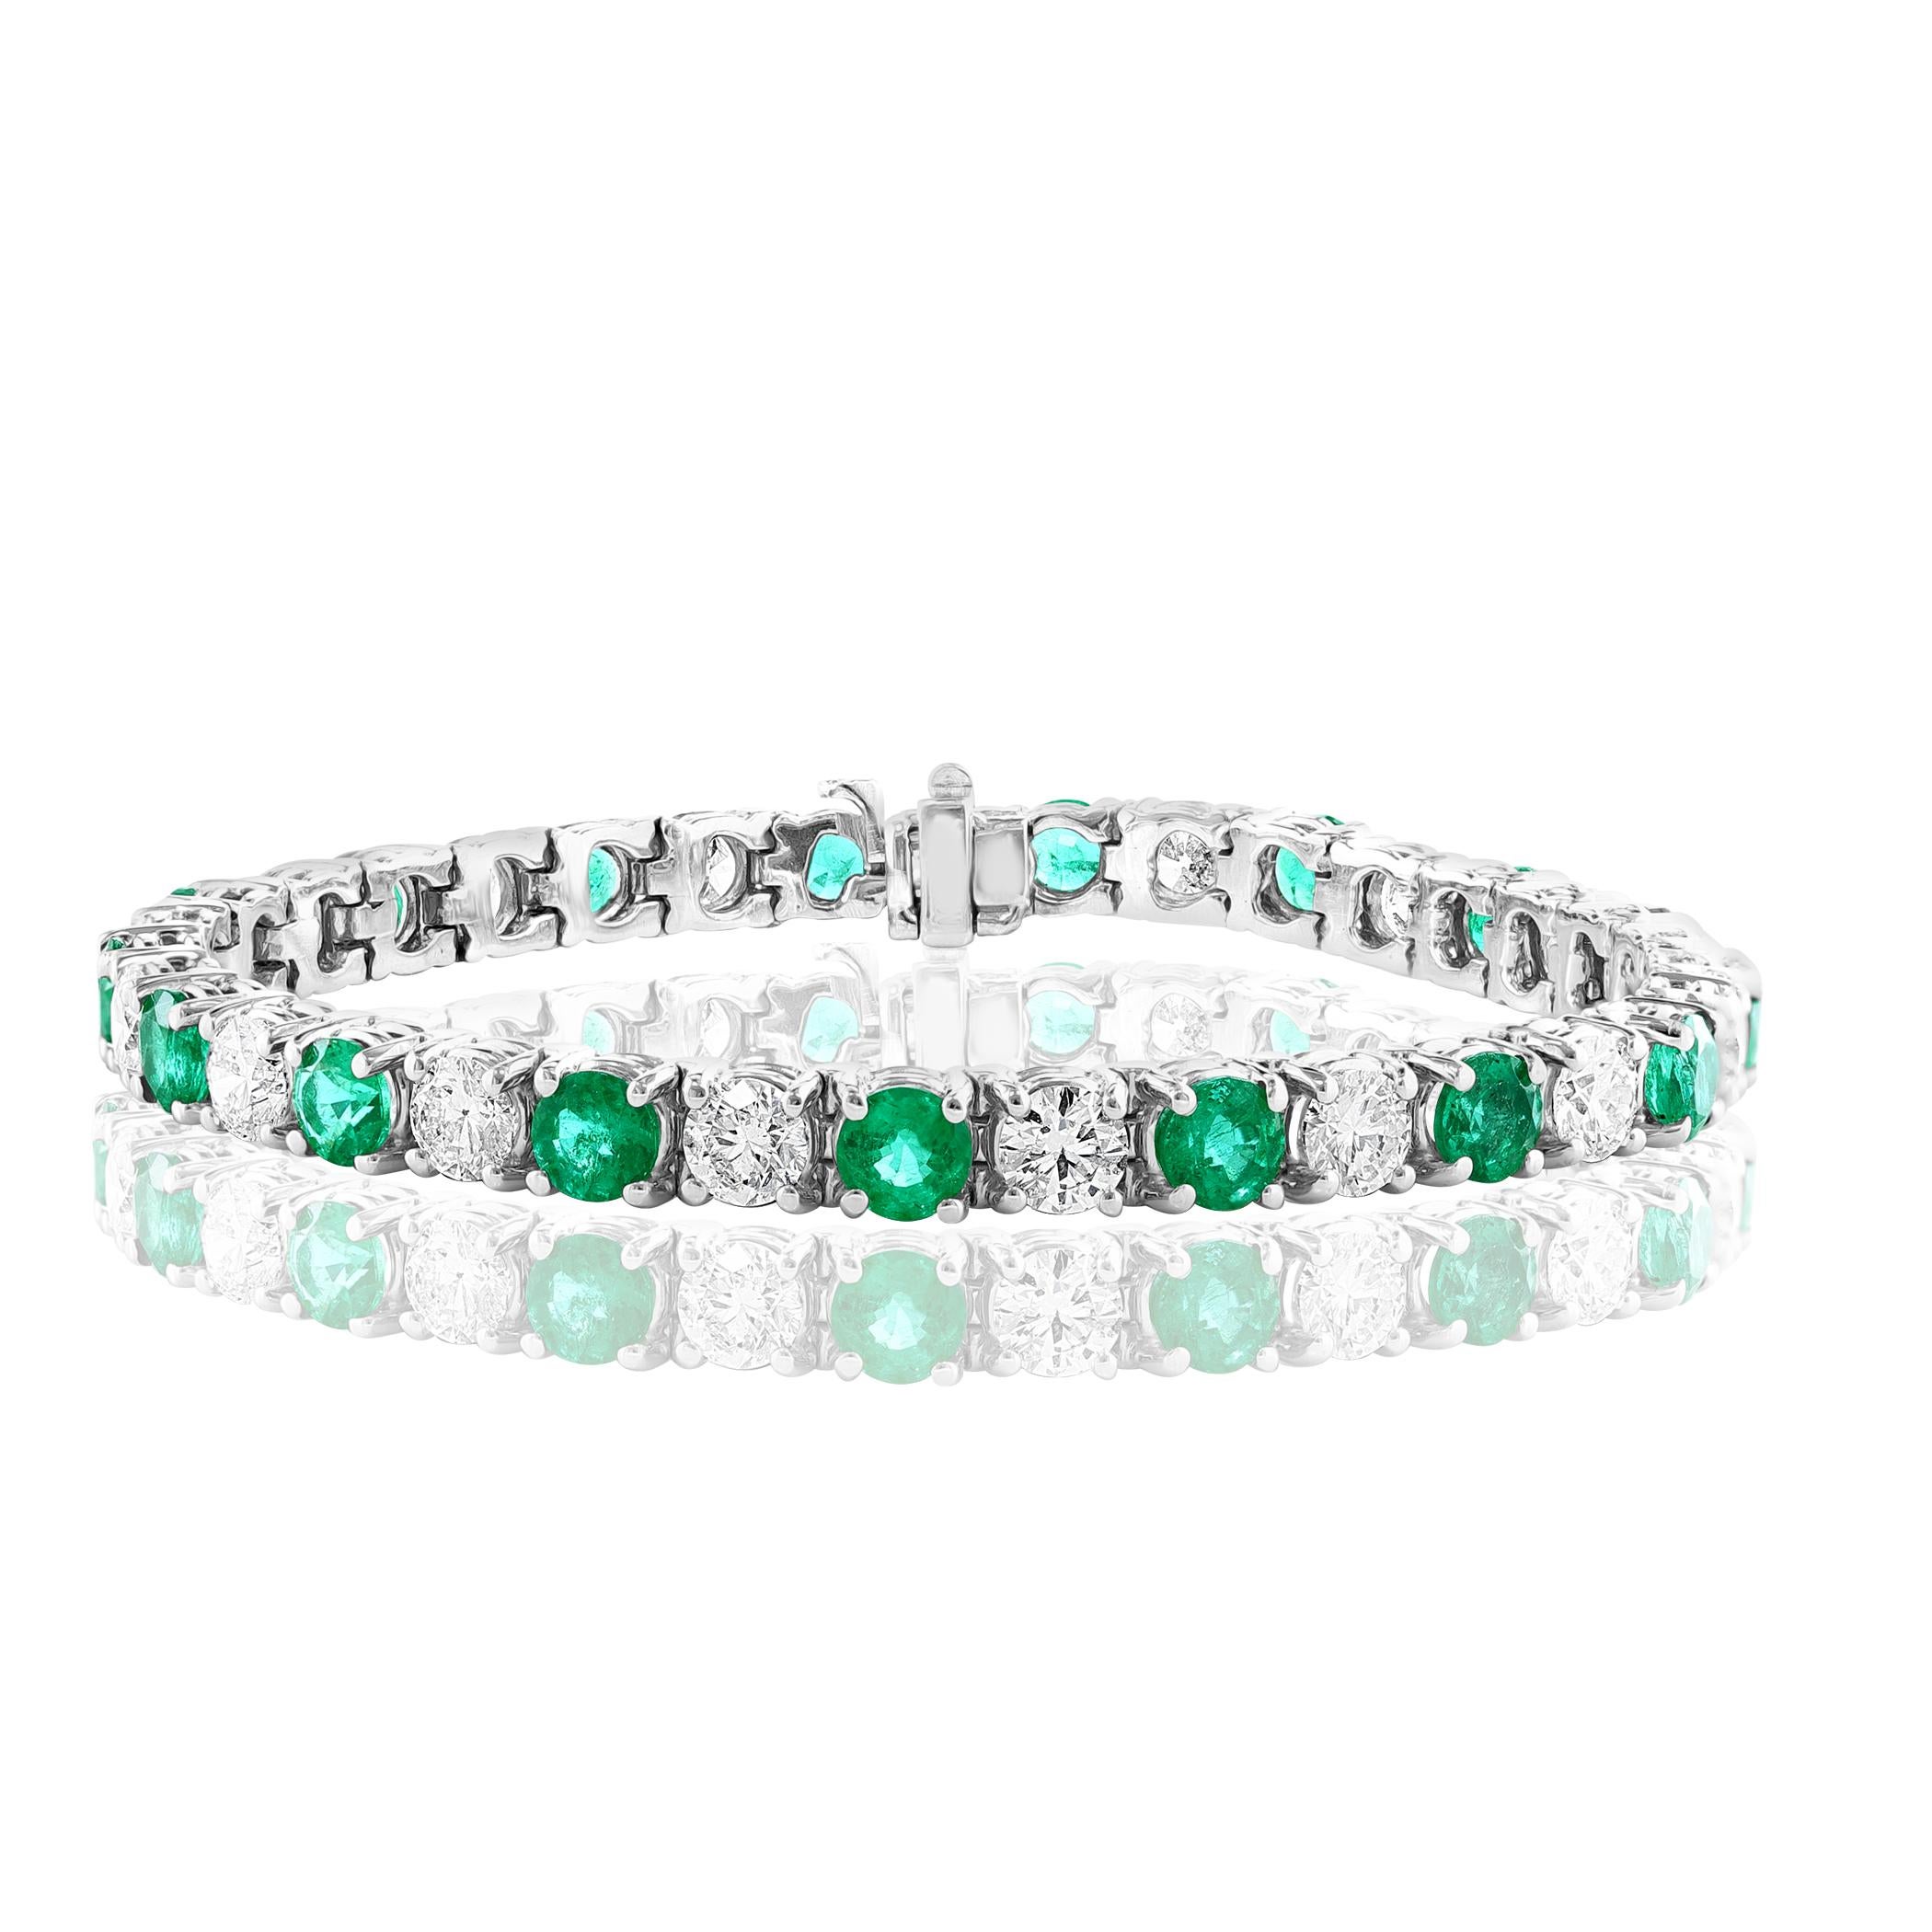 Contemporary 7.48 Carat Emerald and Diamond Tennis Bracelet in 14K White Gold For Sale